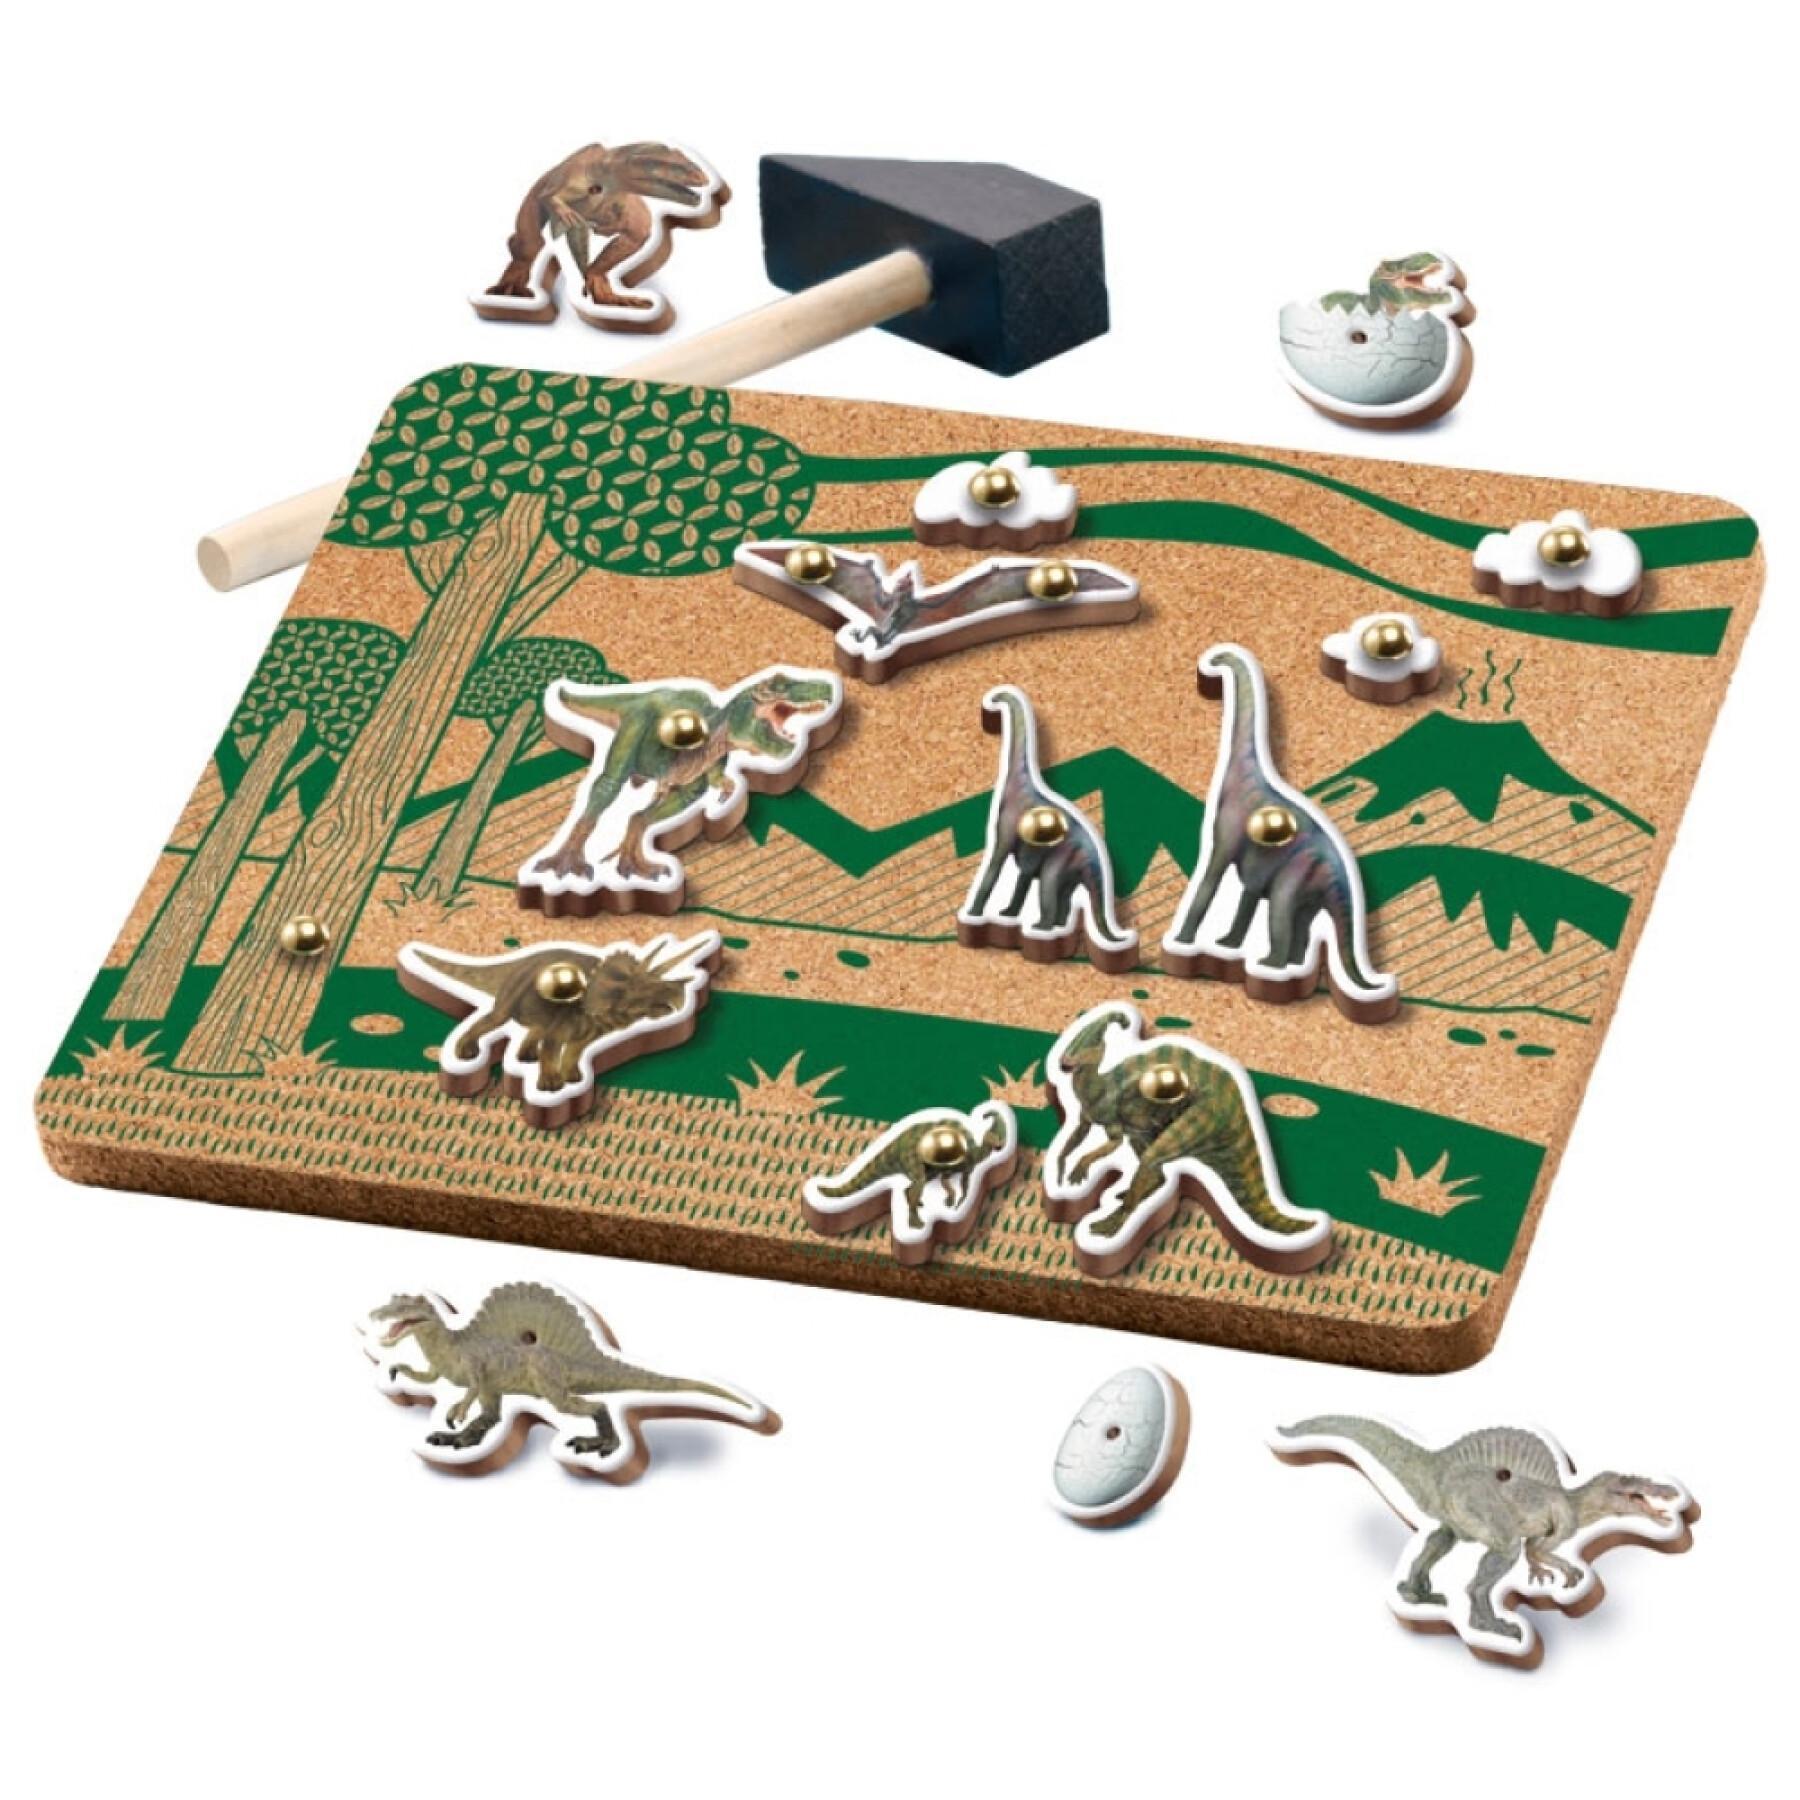 Carpenter's apprentice game with dinosaur figurines + cork plate printed on two sides Totum Dino Forever